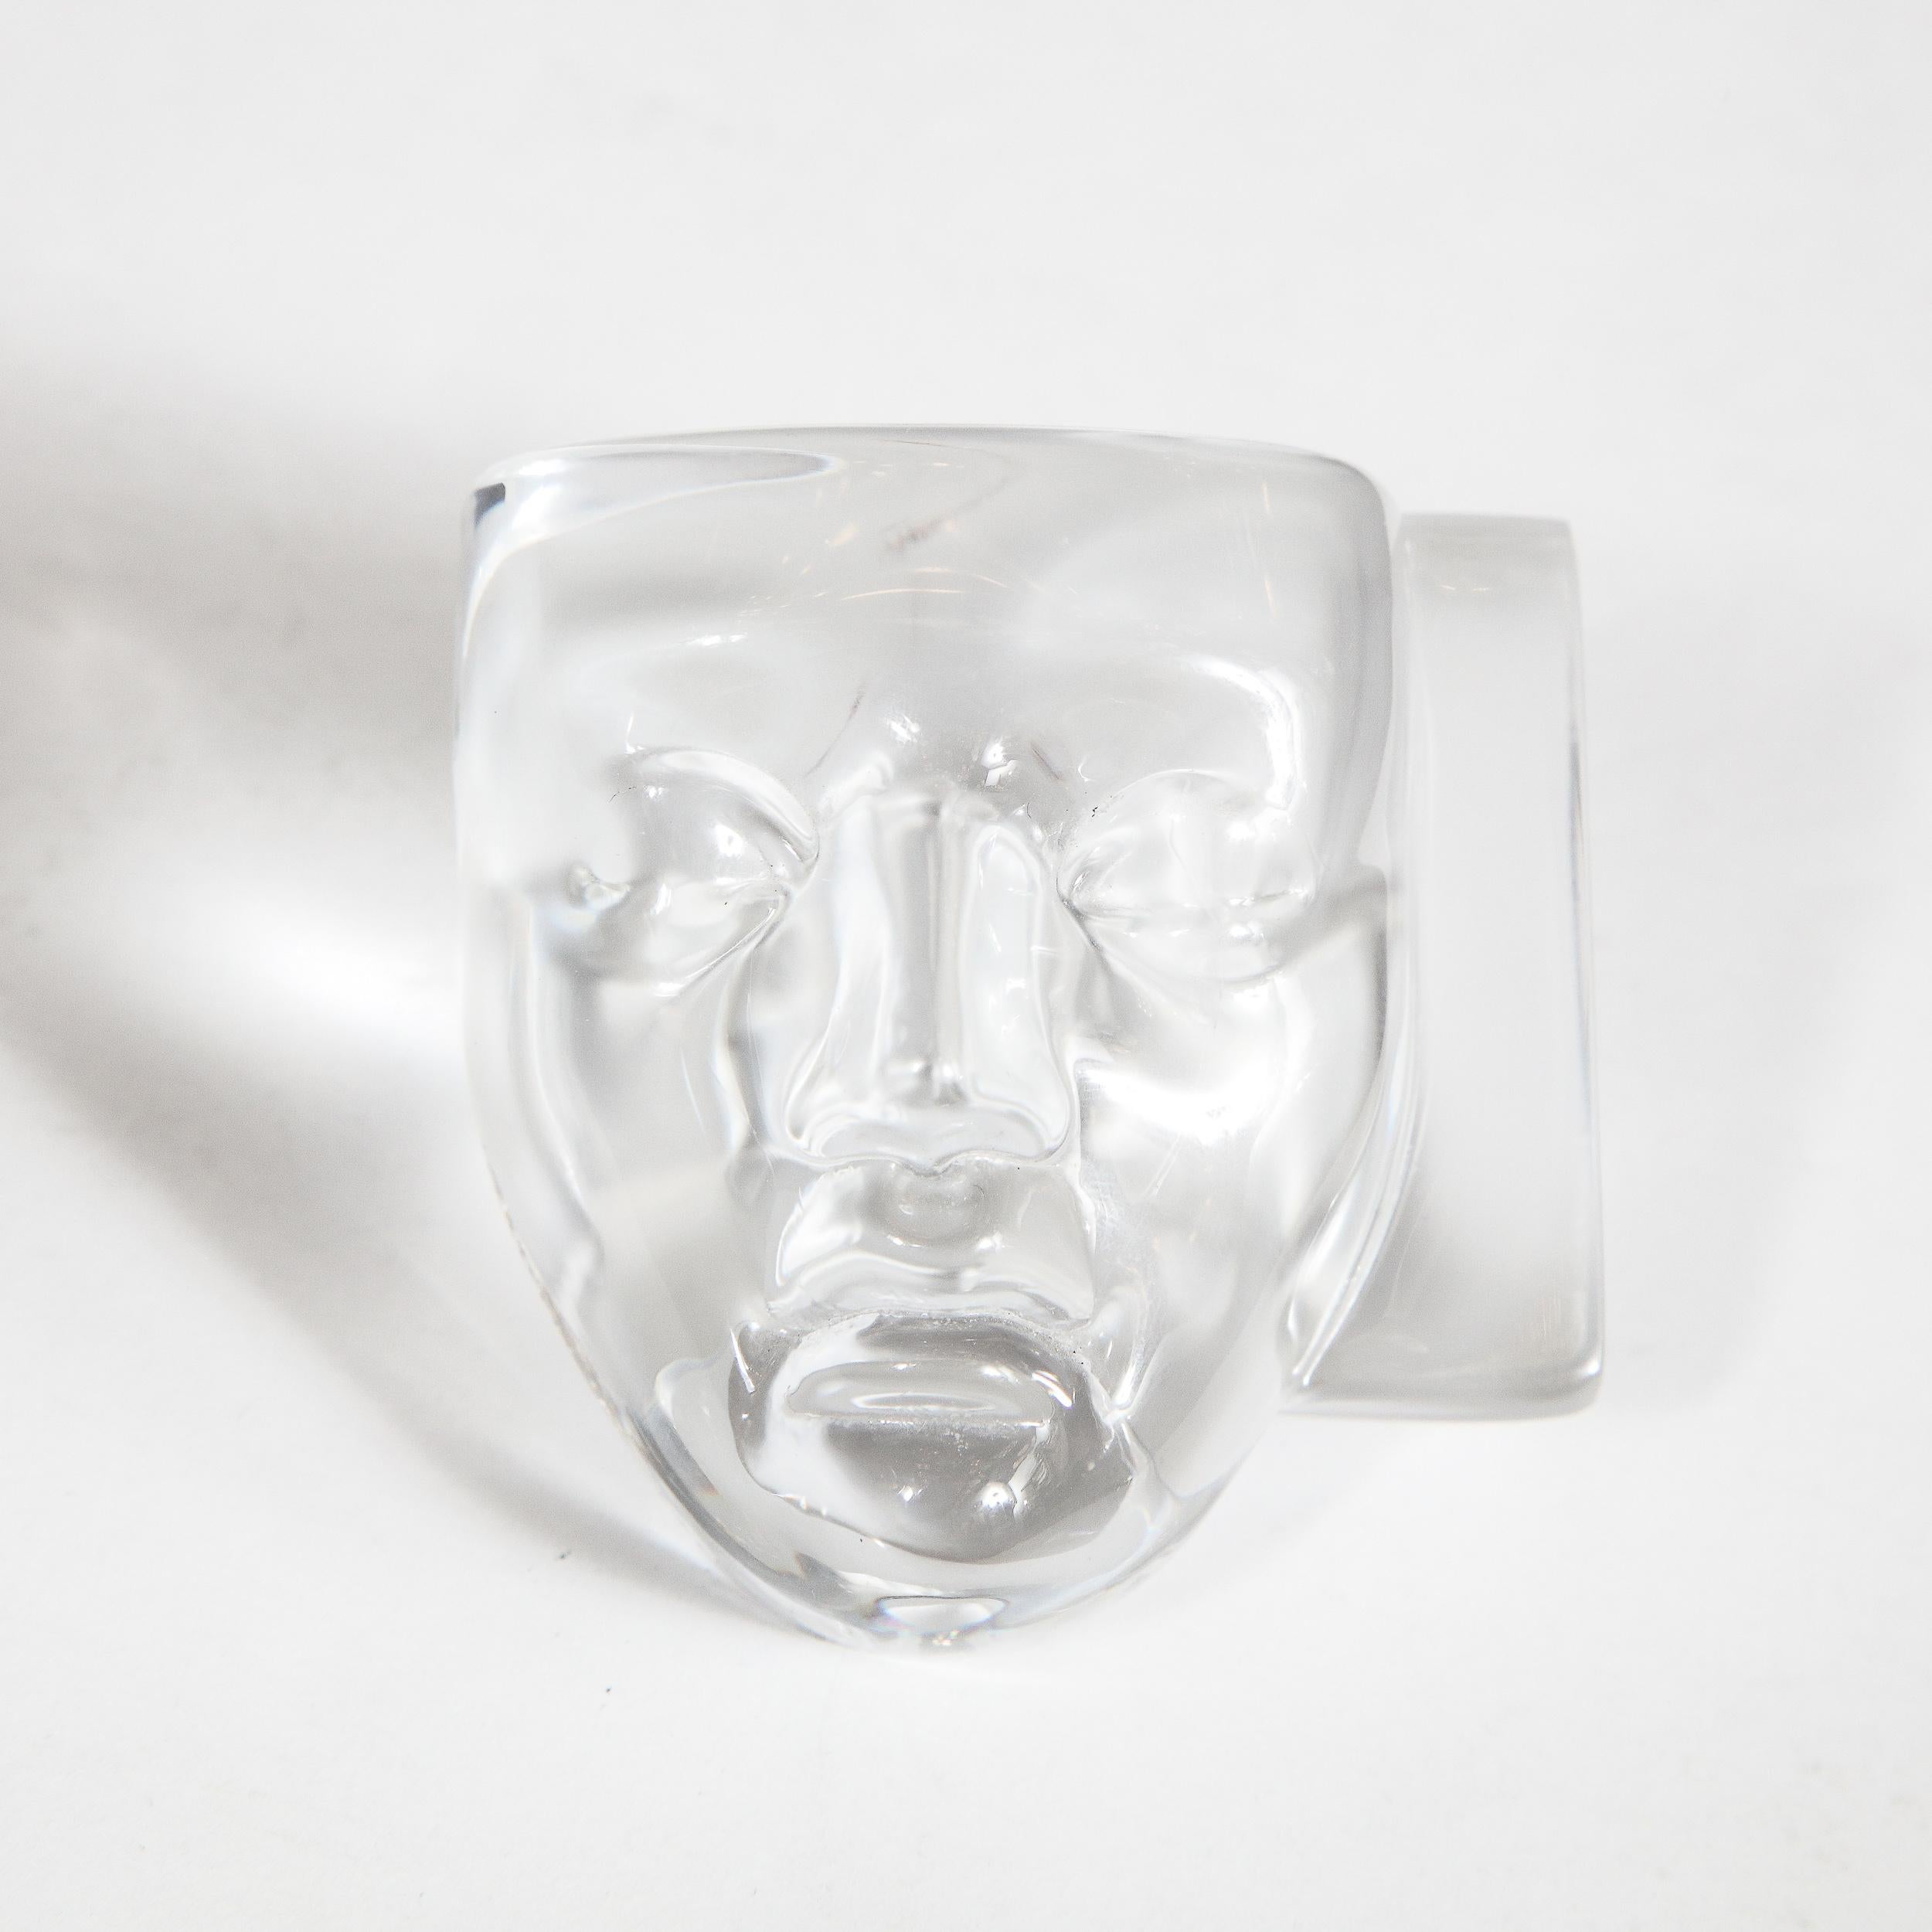 This elegant modernist paperweight was designed by Hilton McConnico and realized by the legendary French maker Daum. It features two Commedia Dell'arte masks (comedy and tragedy) adjoined at a perpendicular angle- one frosted, and the other